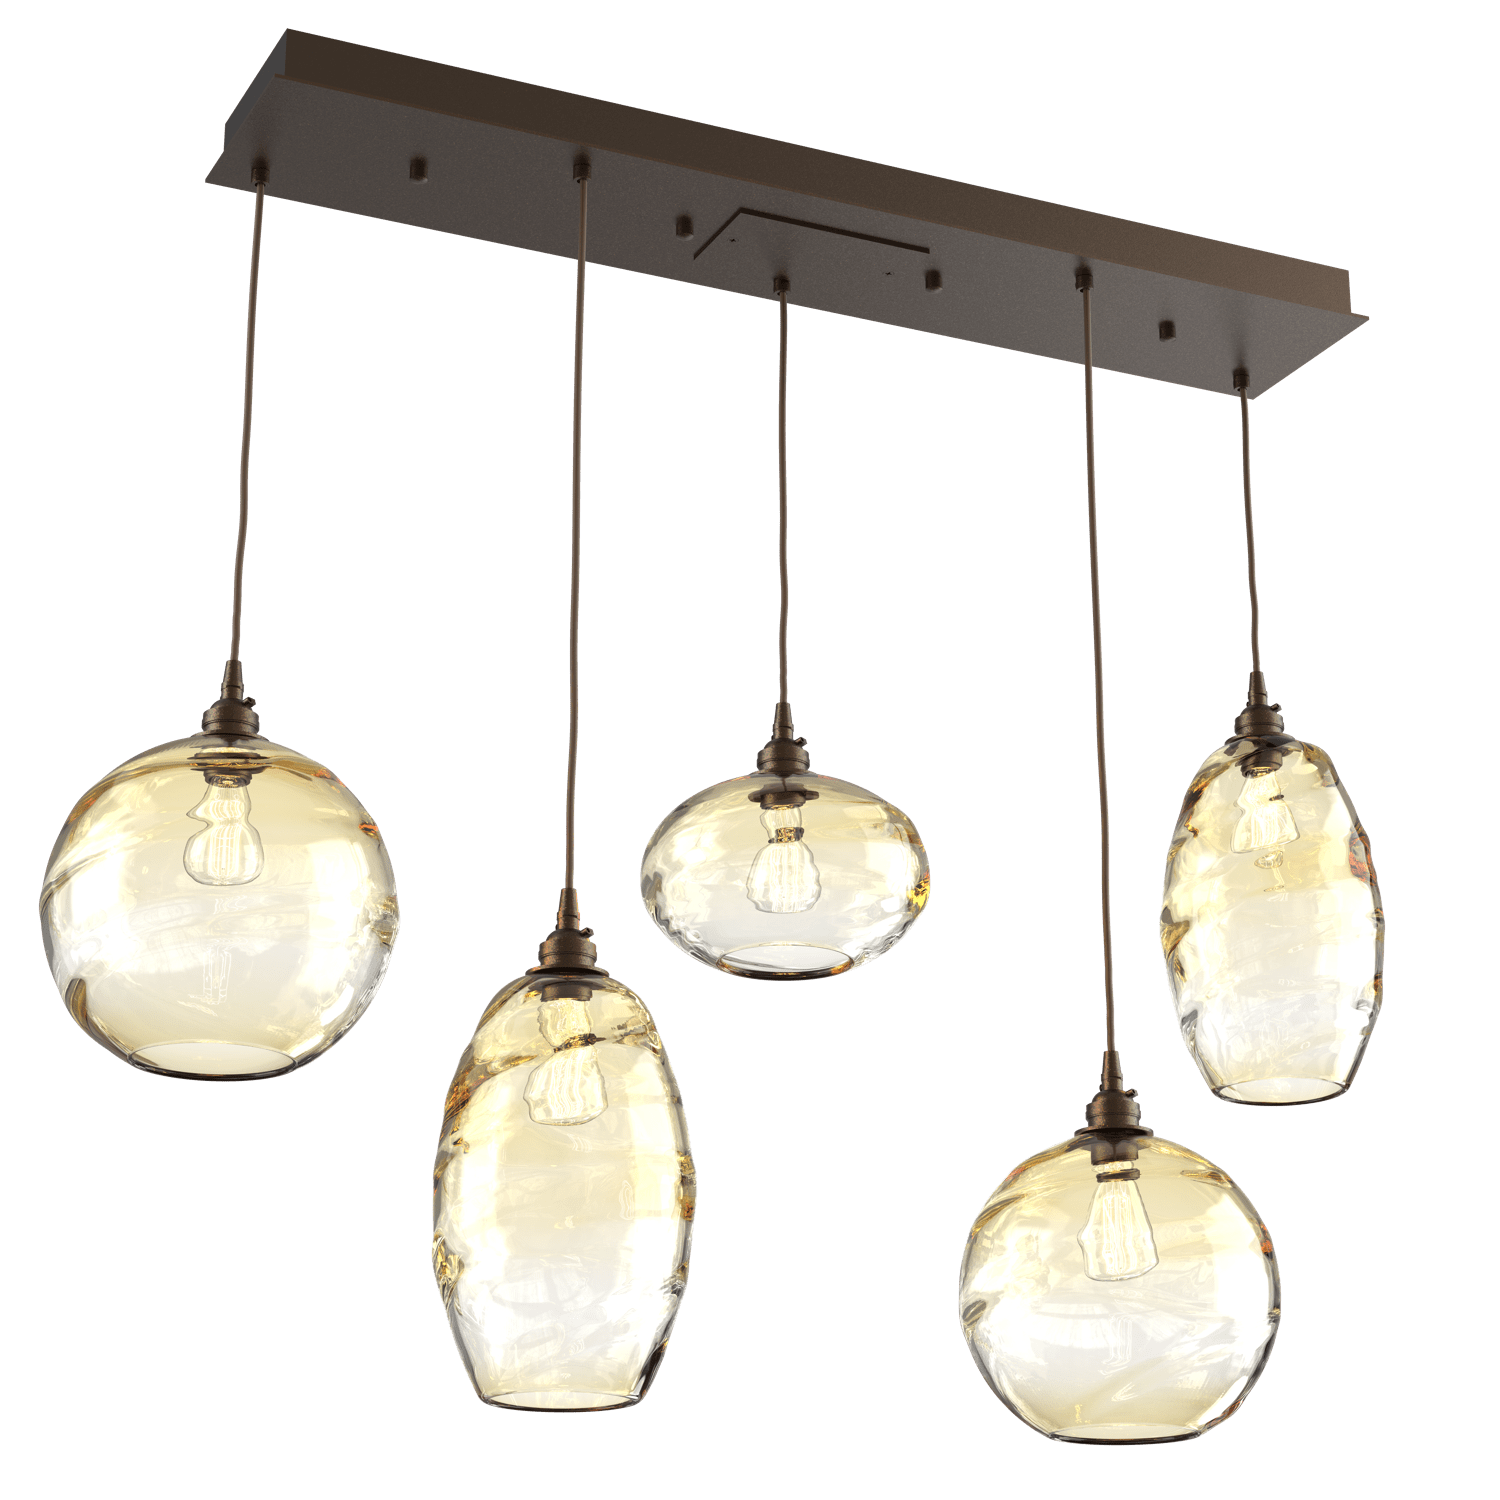 PLB0048-05-FB-OA-Hammerton-Studio-Optic-Blown-Glass-Misto-5-light-linear-pendant-chandelier-with-flat-bronze-finish-and-optic-amber-blown-glass-shades-and-incandescent-lamping